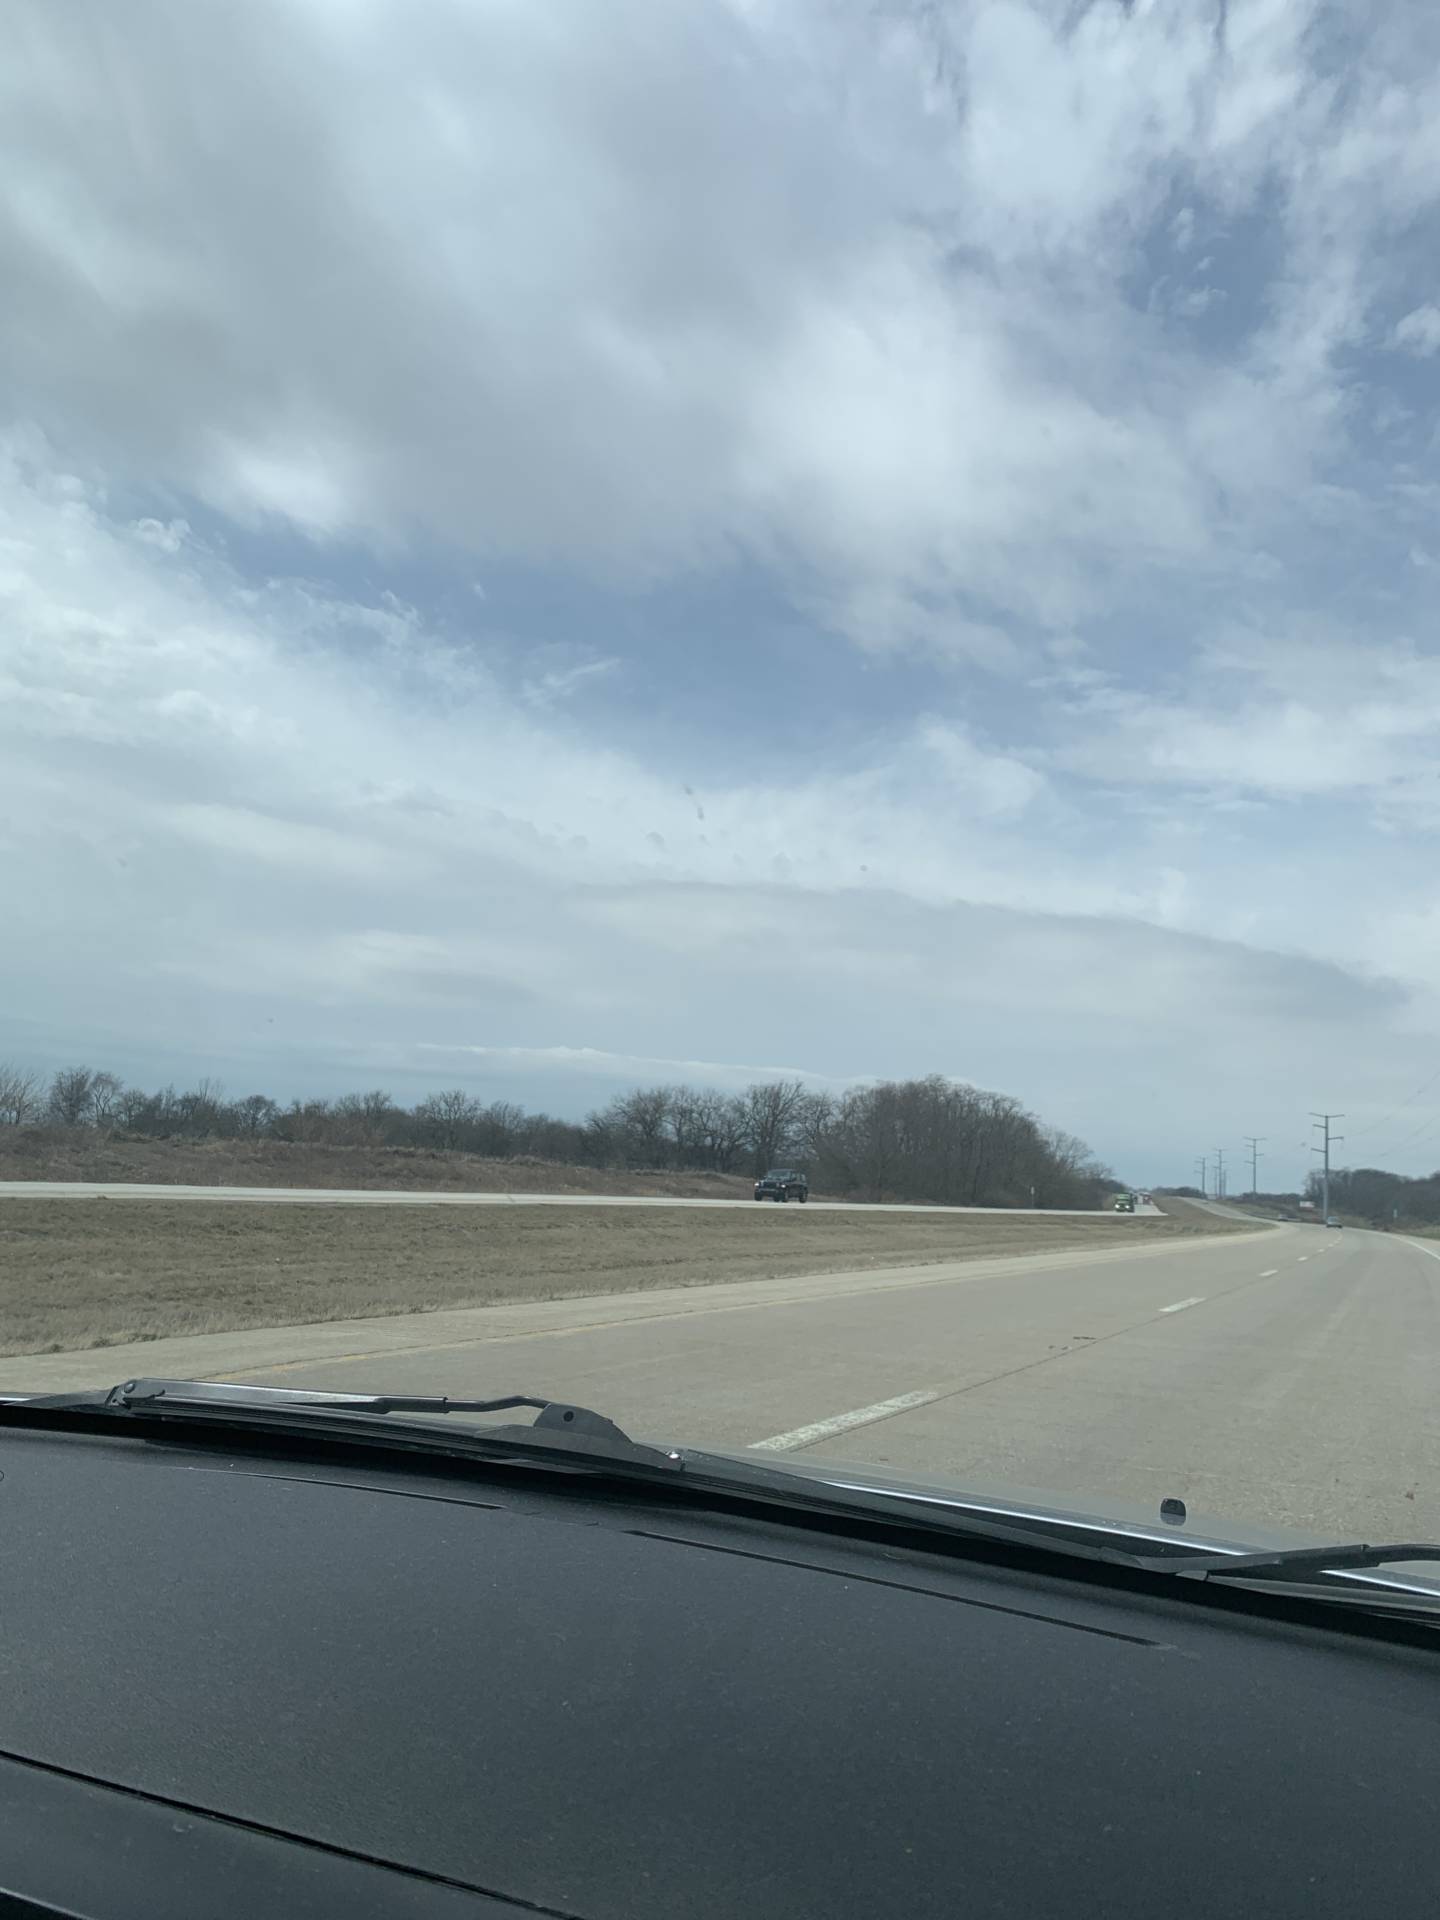 Got the sky nobody wants to see today East of Knoxville IL.